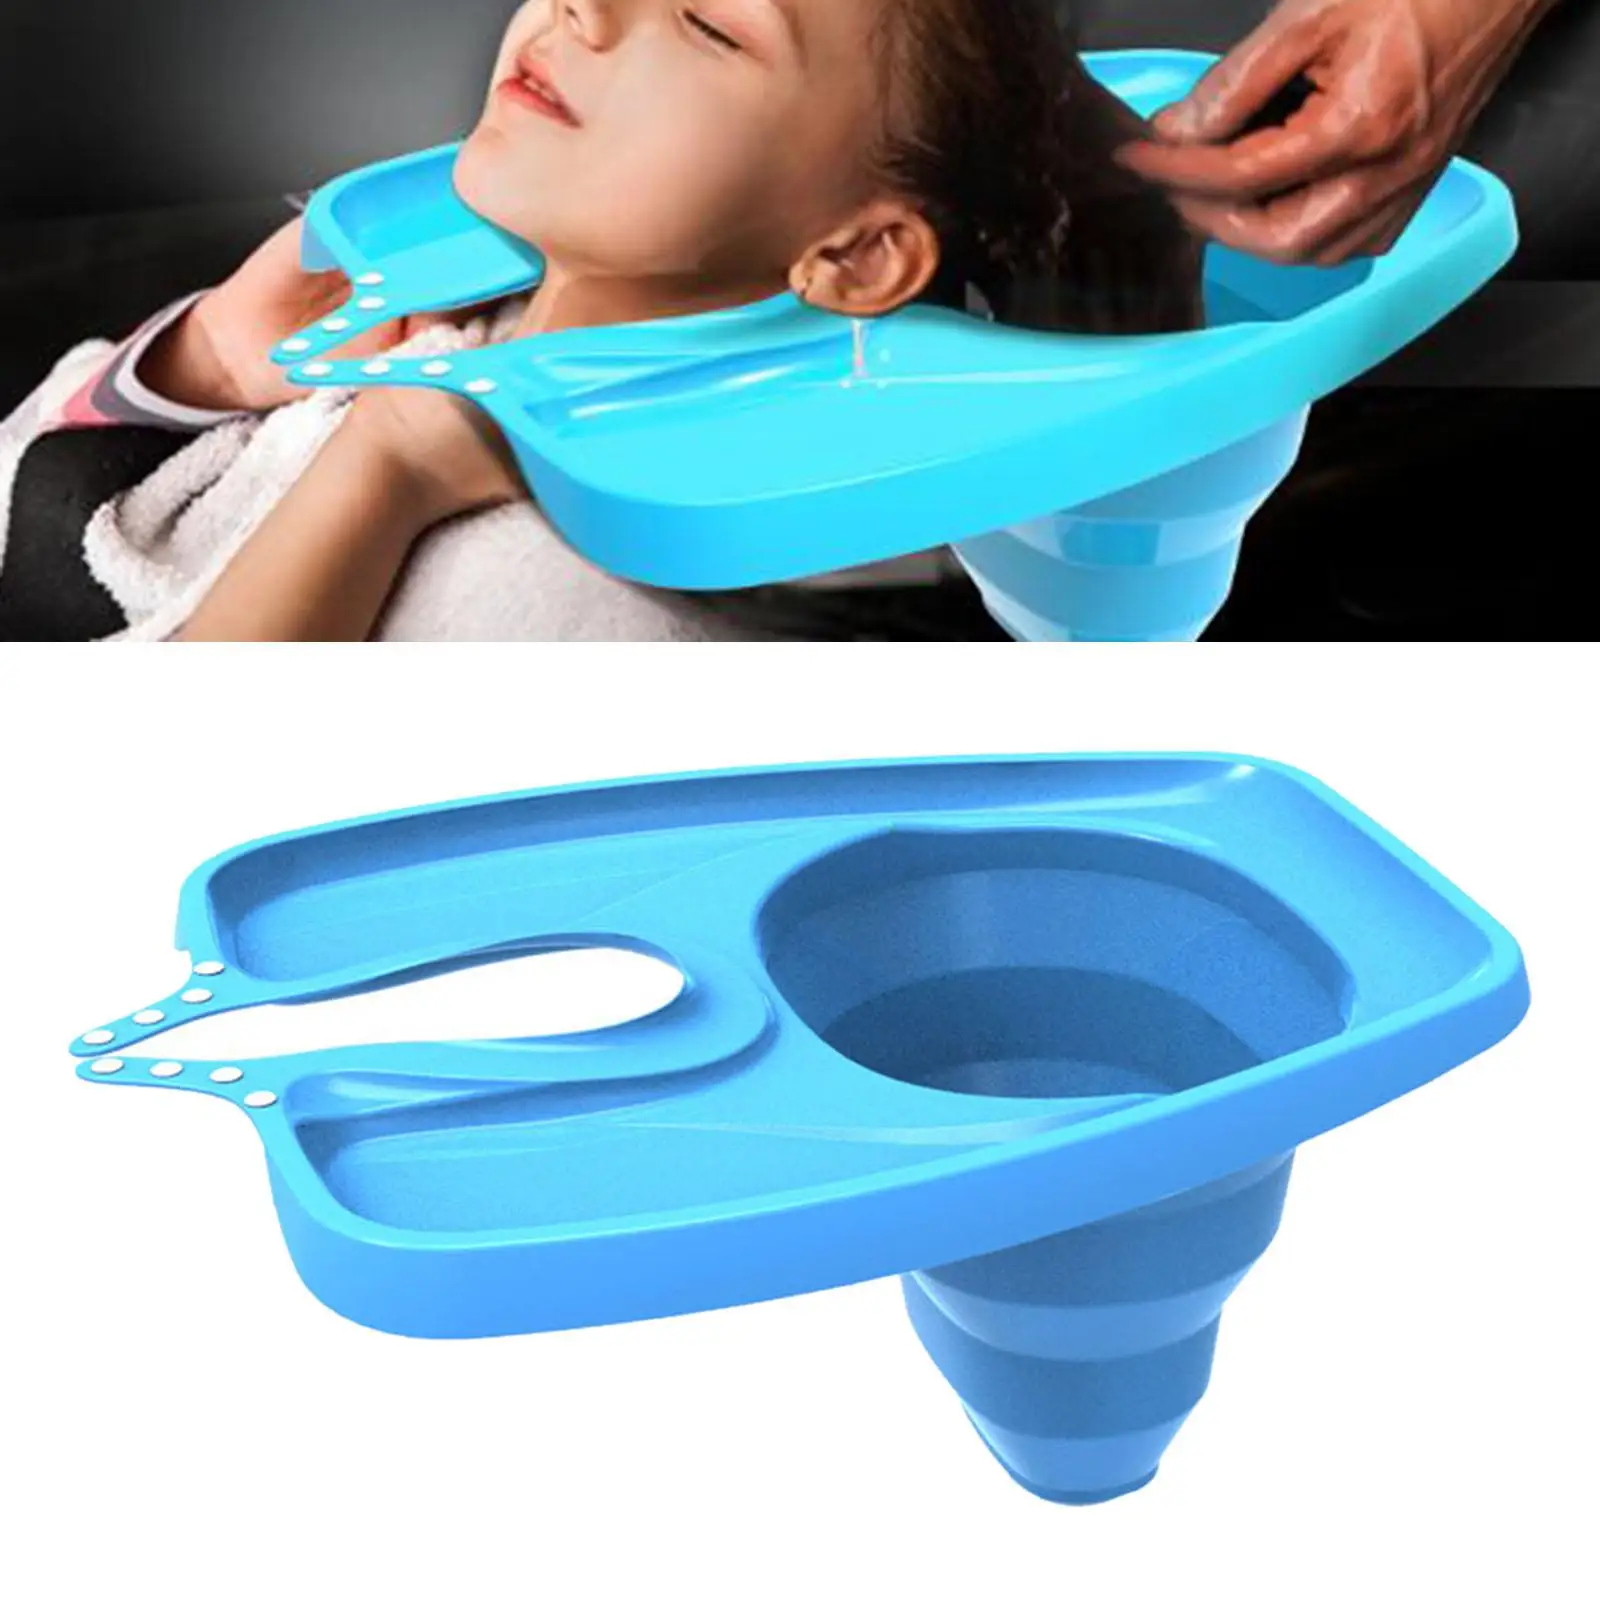 Hanging Hair Washing Basin Tray Foldable Ergonomics TPE Shampoo Sink Mobile Tray for Hair Salon SPA Wheelchair Pregnant Disabled